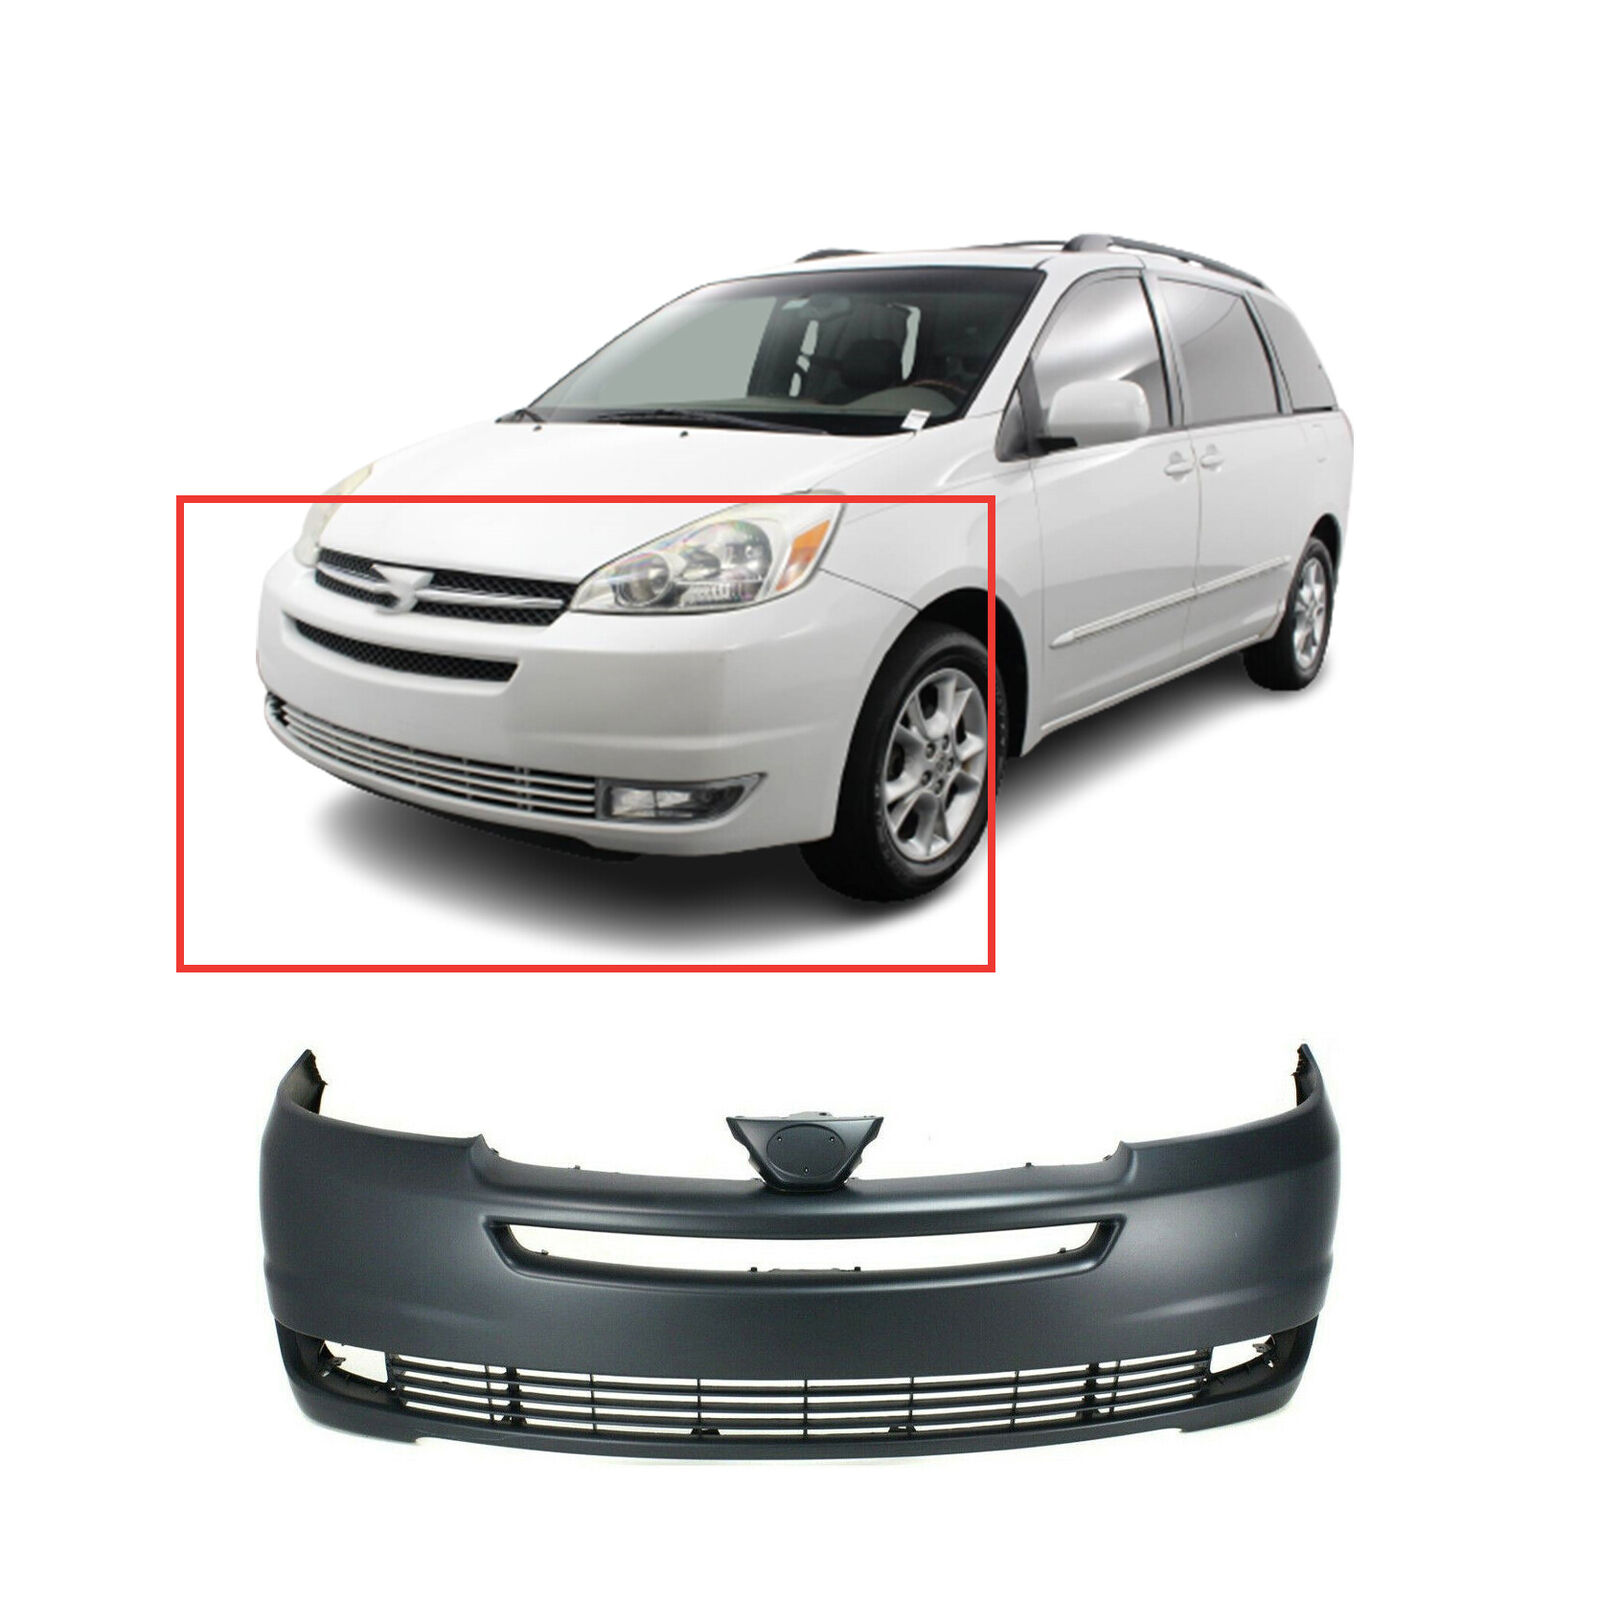 Front Bumper Cover For 2004-2005 Toyota Sienna w/ fog lamp holes CE LE XLE  687398506927 | eBay